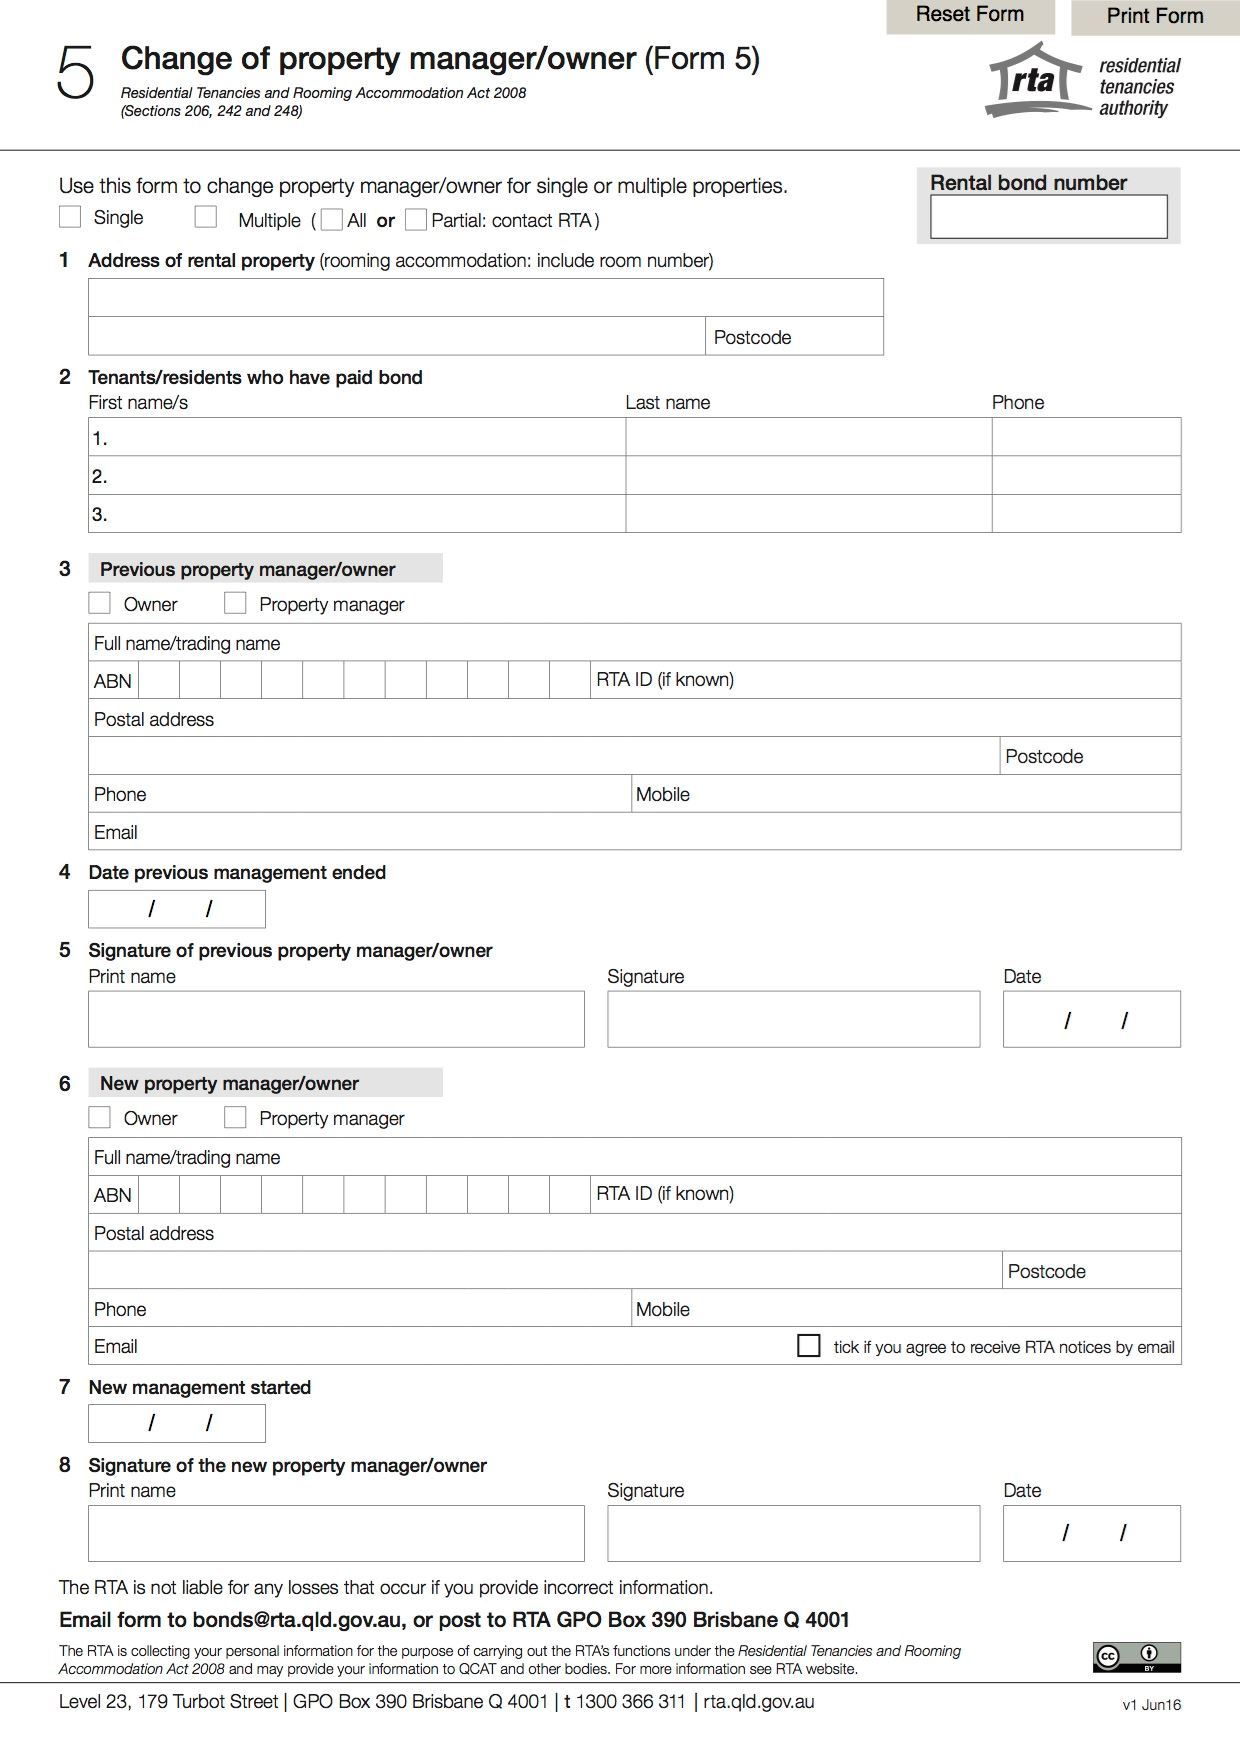 Residential Tenancy Agreement Qld Queensland Change Of Property Manager Or Owner Form 5 Legal Forms